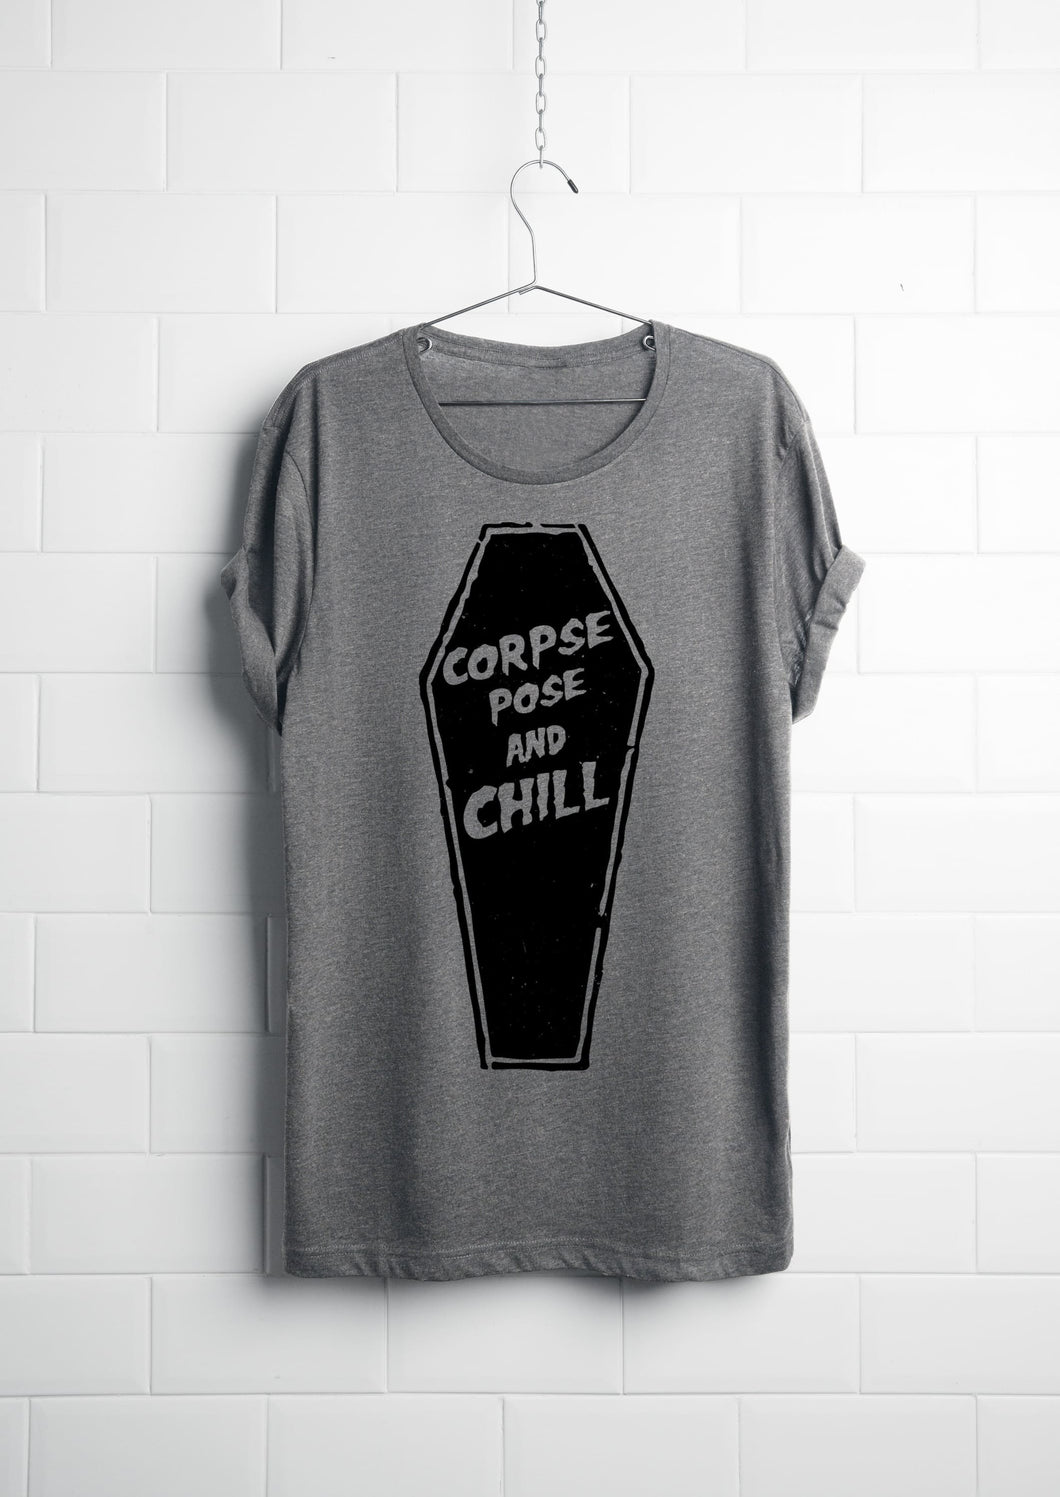 Corpse Pose and Chill T-Shirt - Shirts - Yeti Yoga Co. - cotton excercise fitness fitness product health